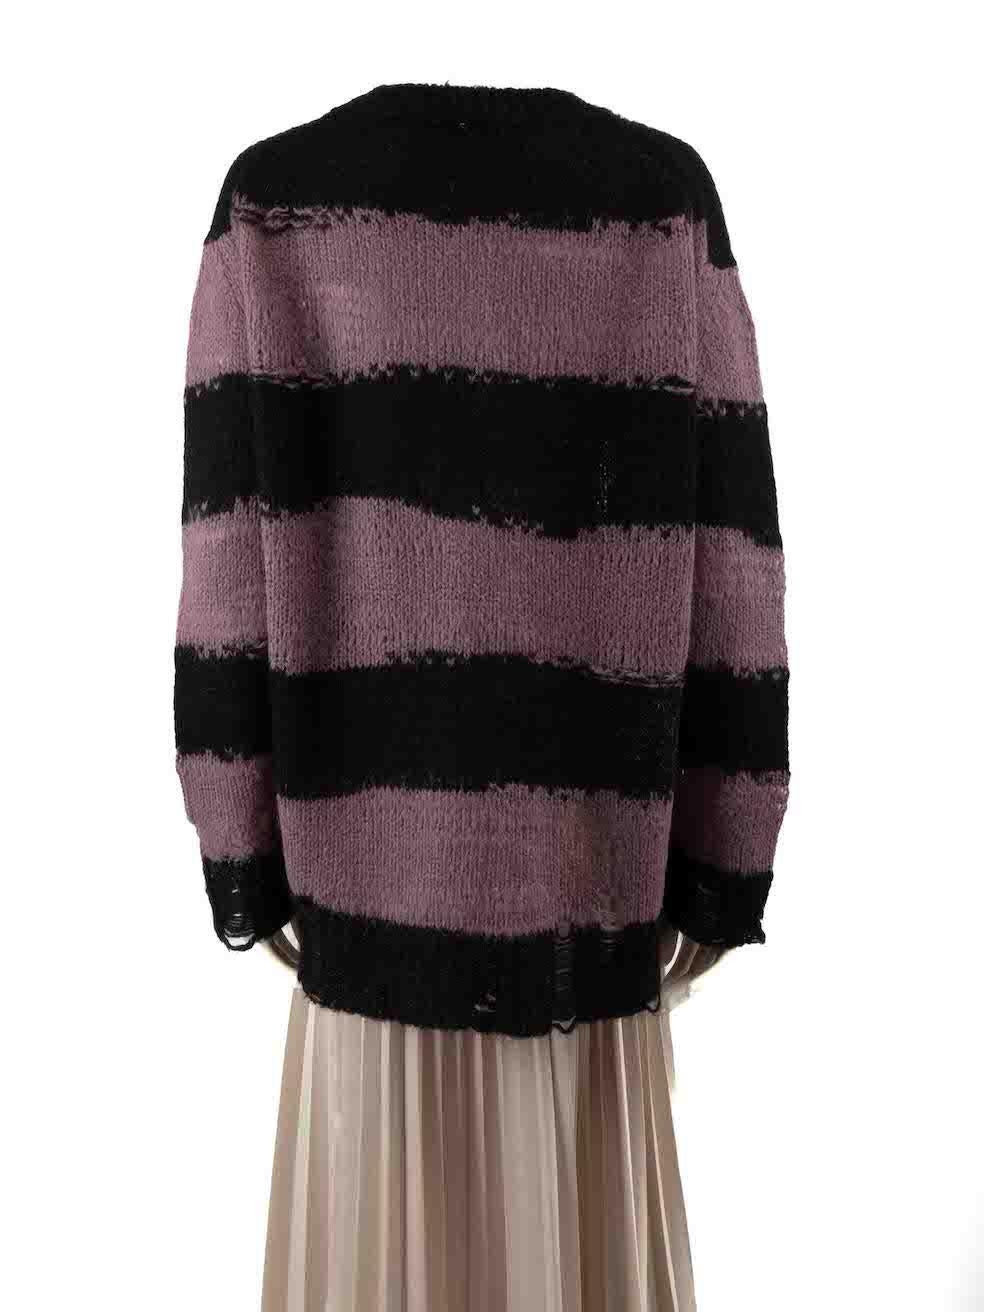 Acne Studios Striped Distressed Knit Jumper Size S In Good Condition For Sale In London, GB